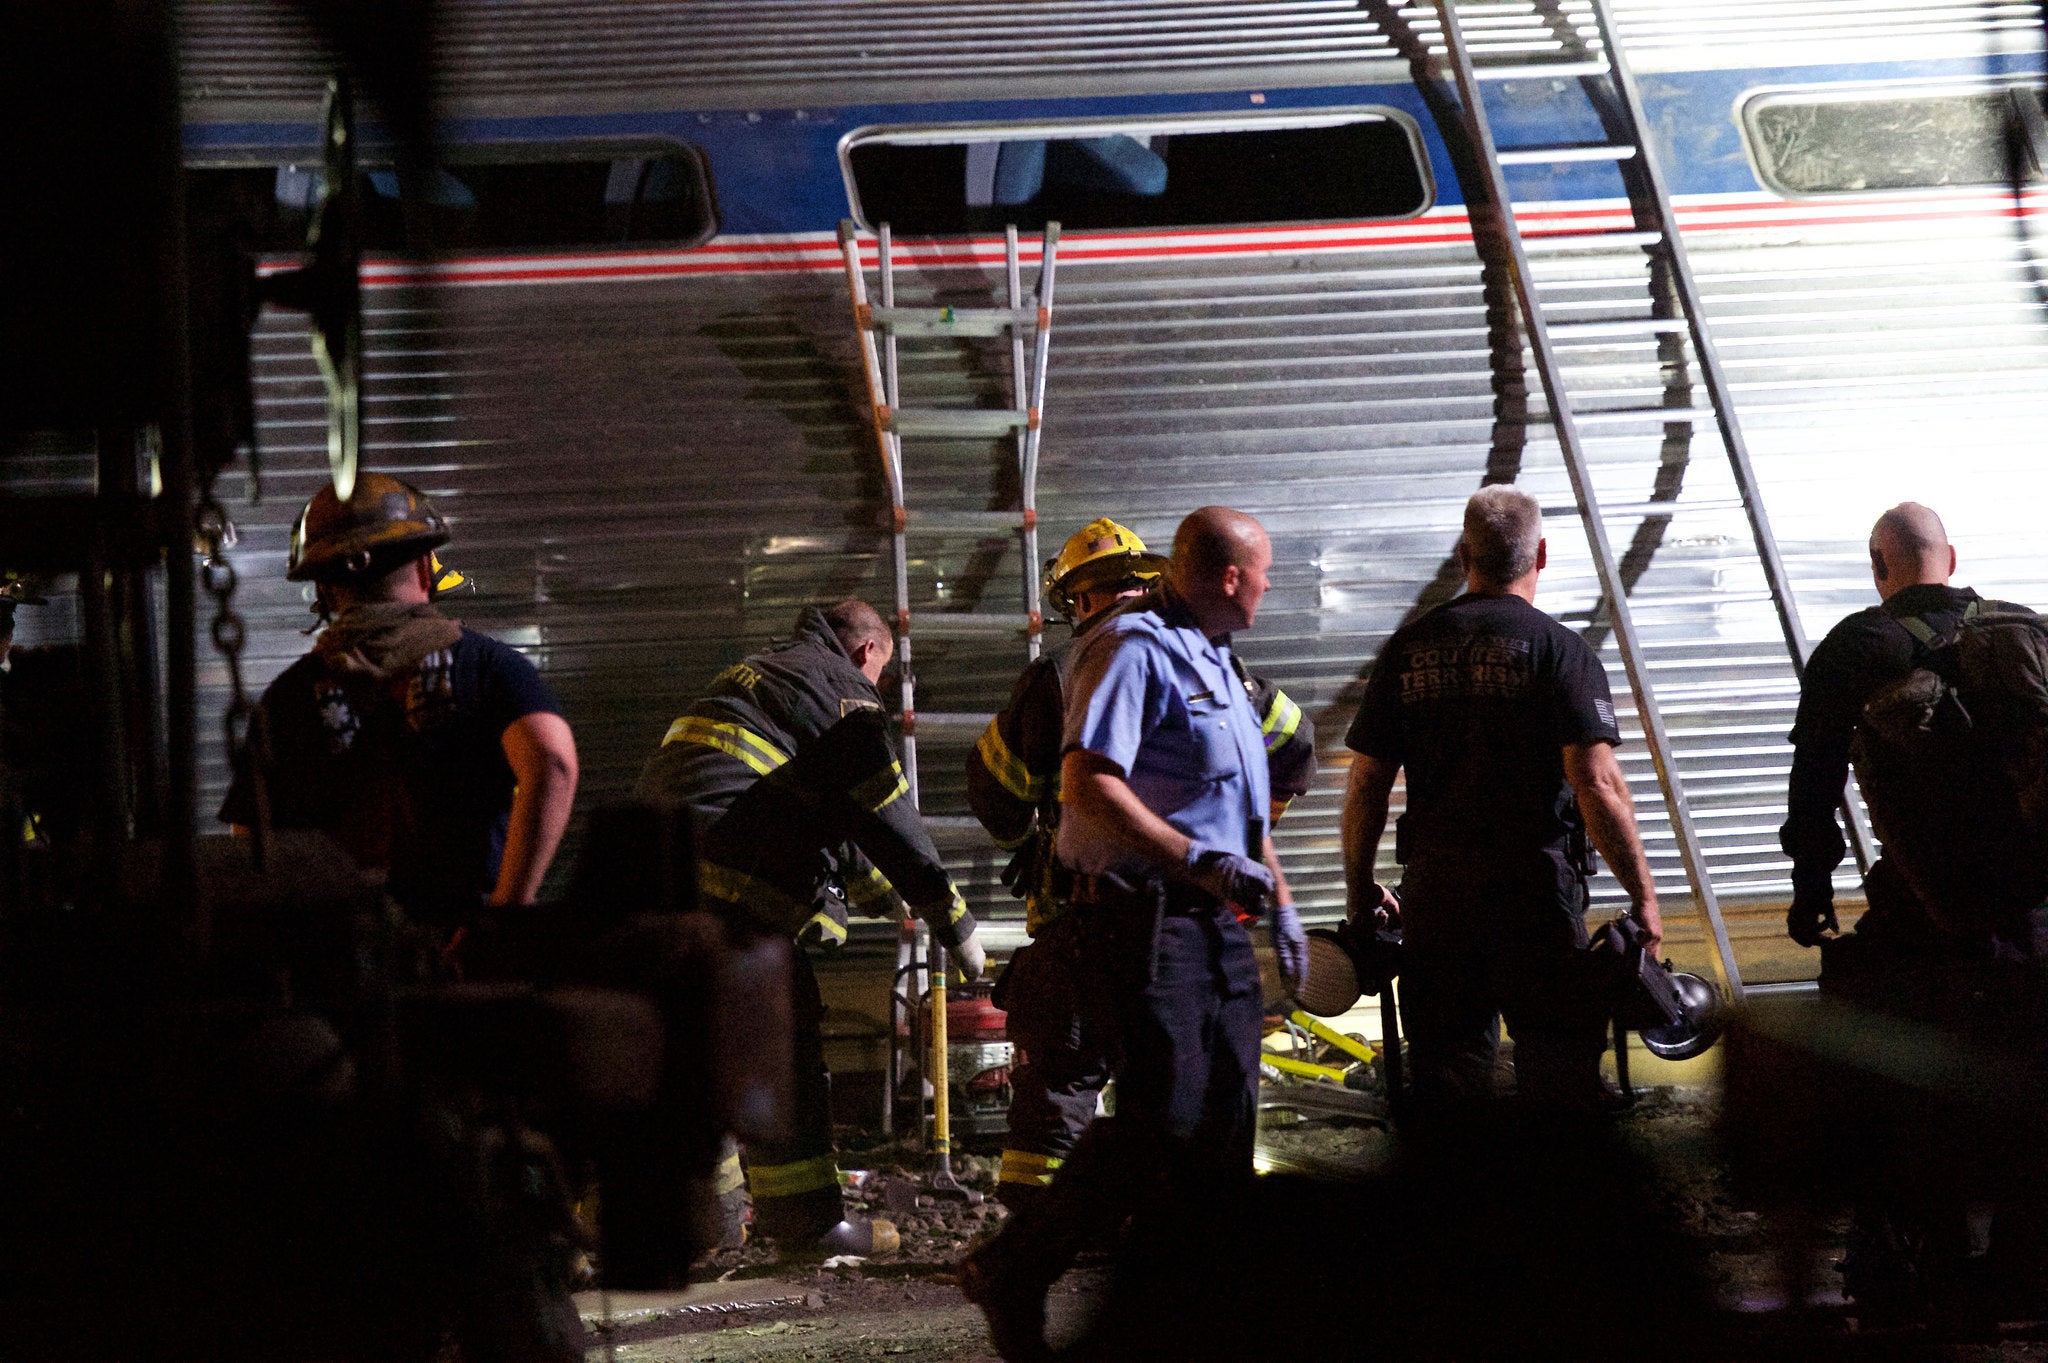 Emergency teams at the scene of the crashed train, which was carrying 243 people